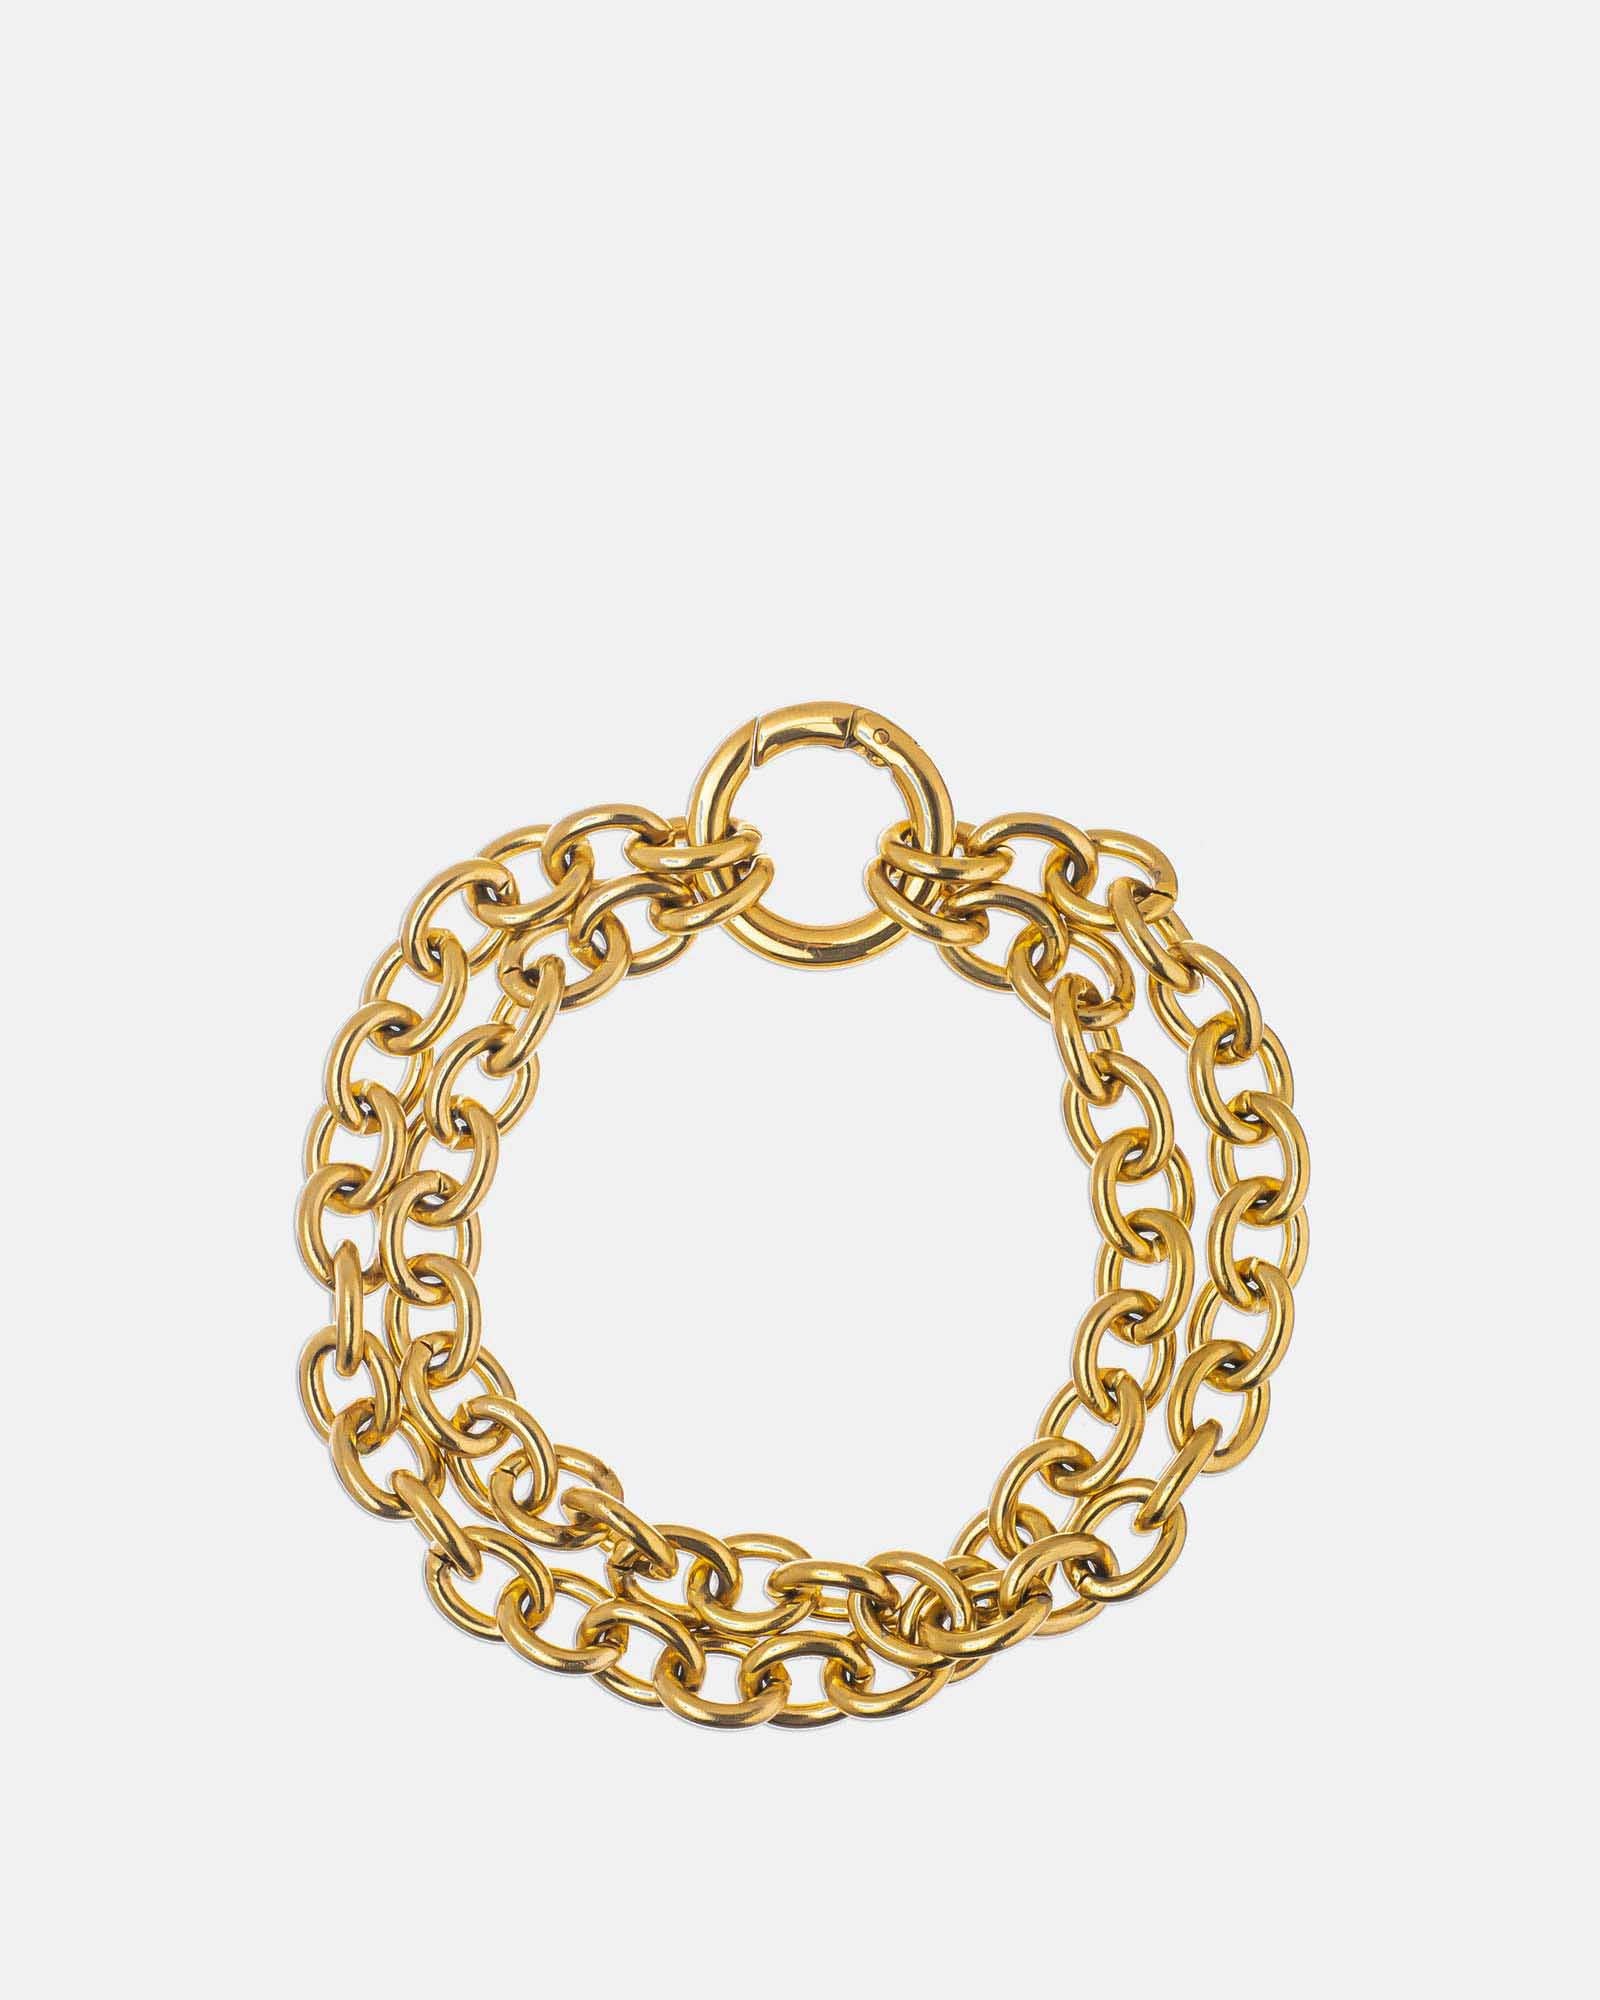 Susan Shaw Gold Double Chain with Cotton Pearl Bracelet - Abraham's